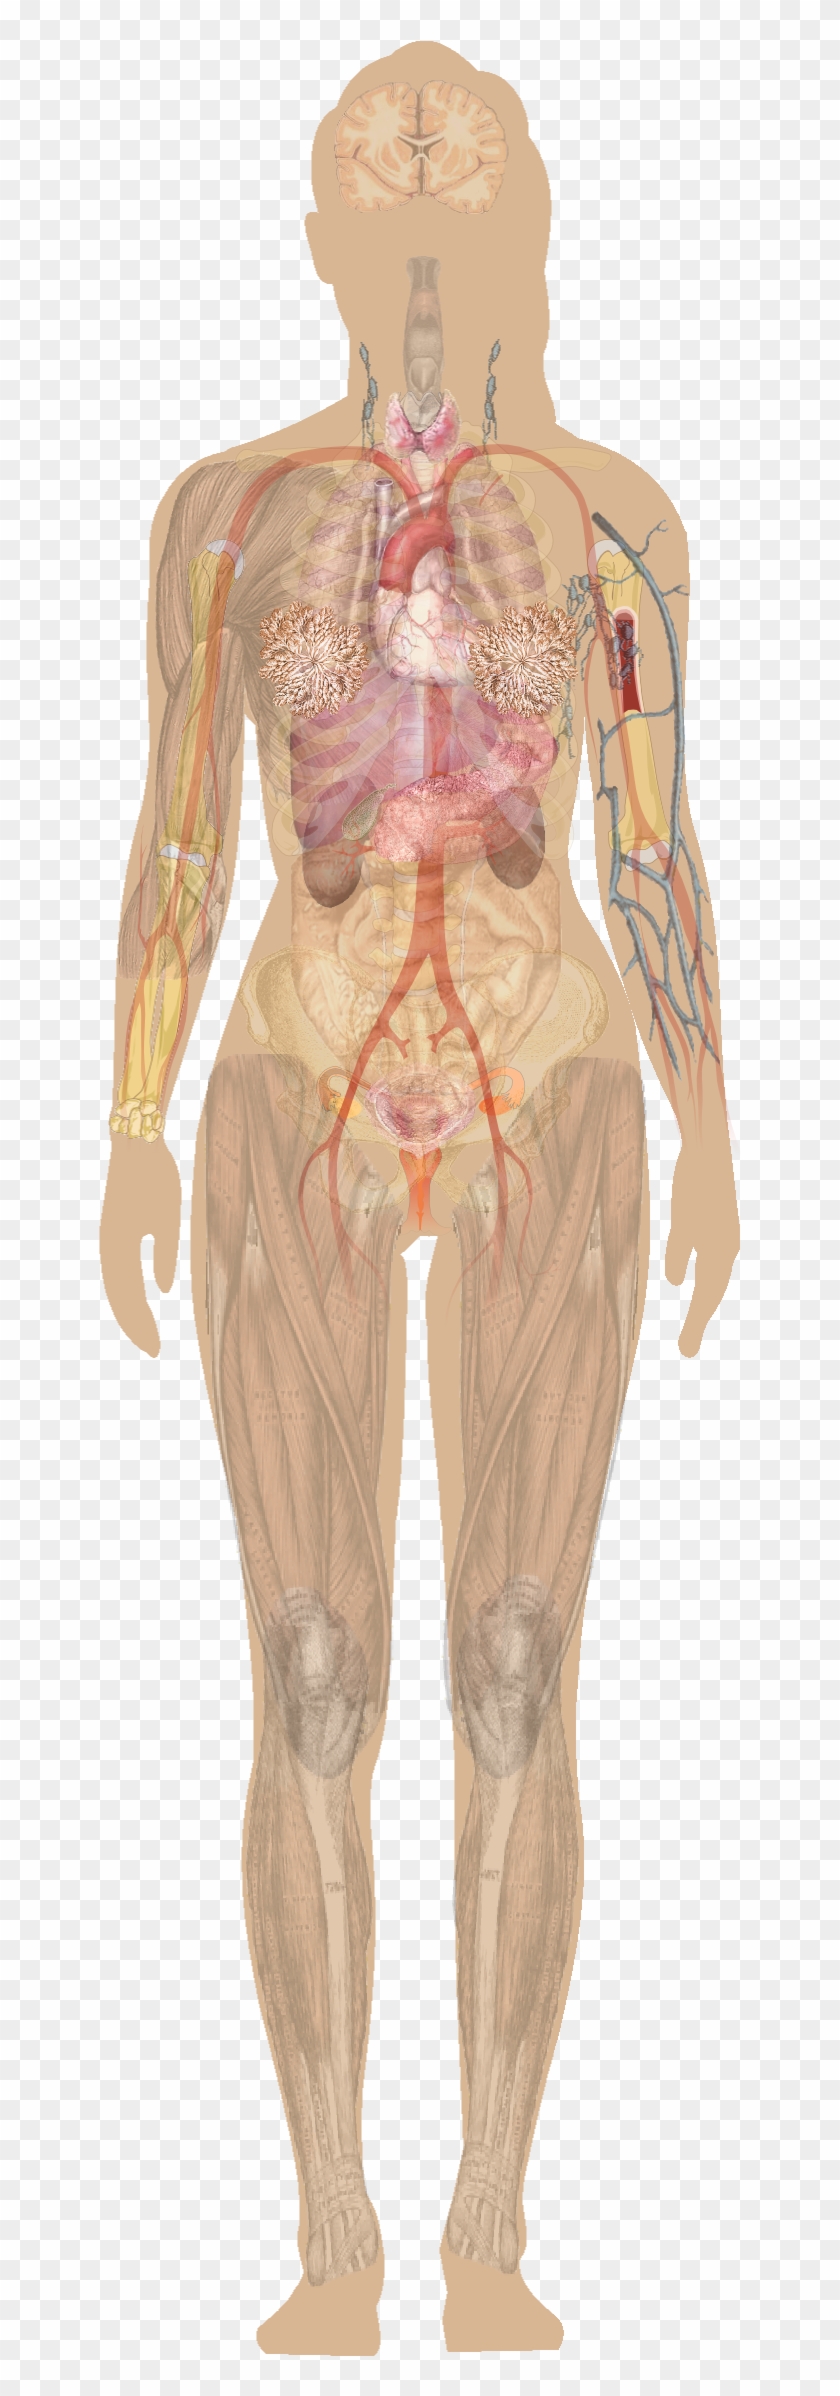 Download Female Shadow Anatomy Without Labels - Human Body Without